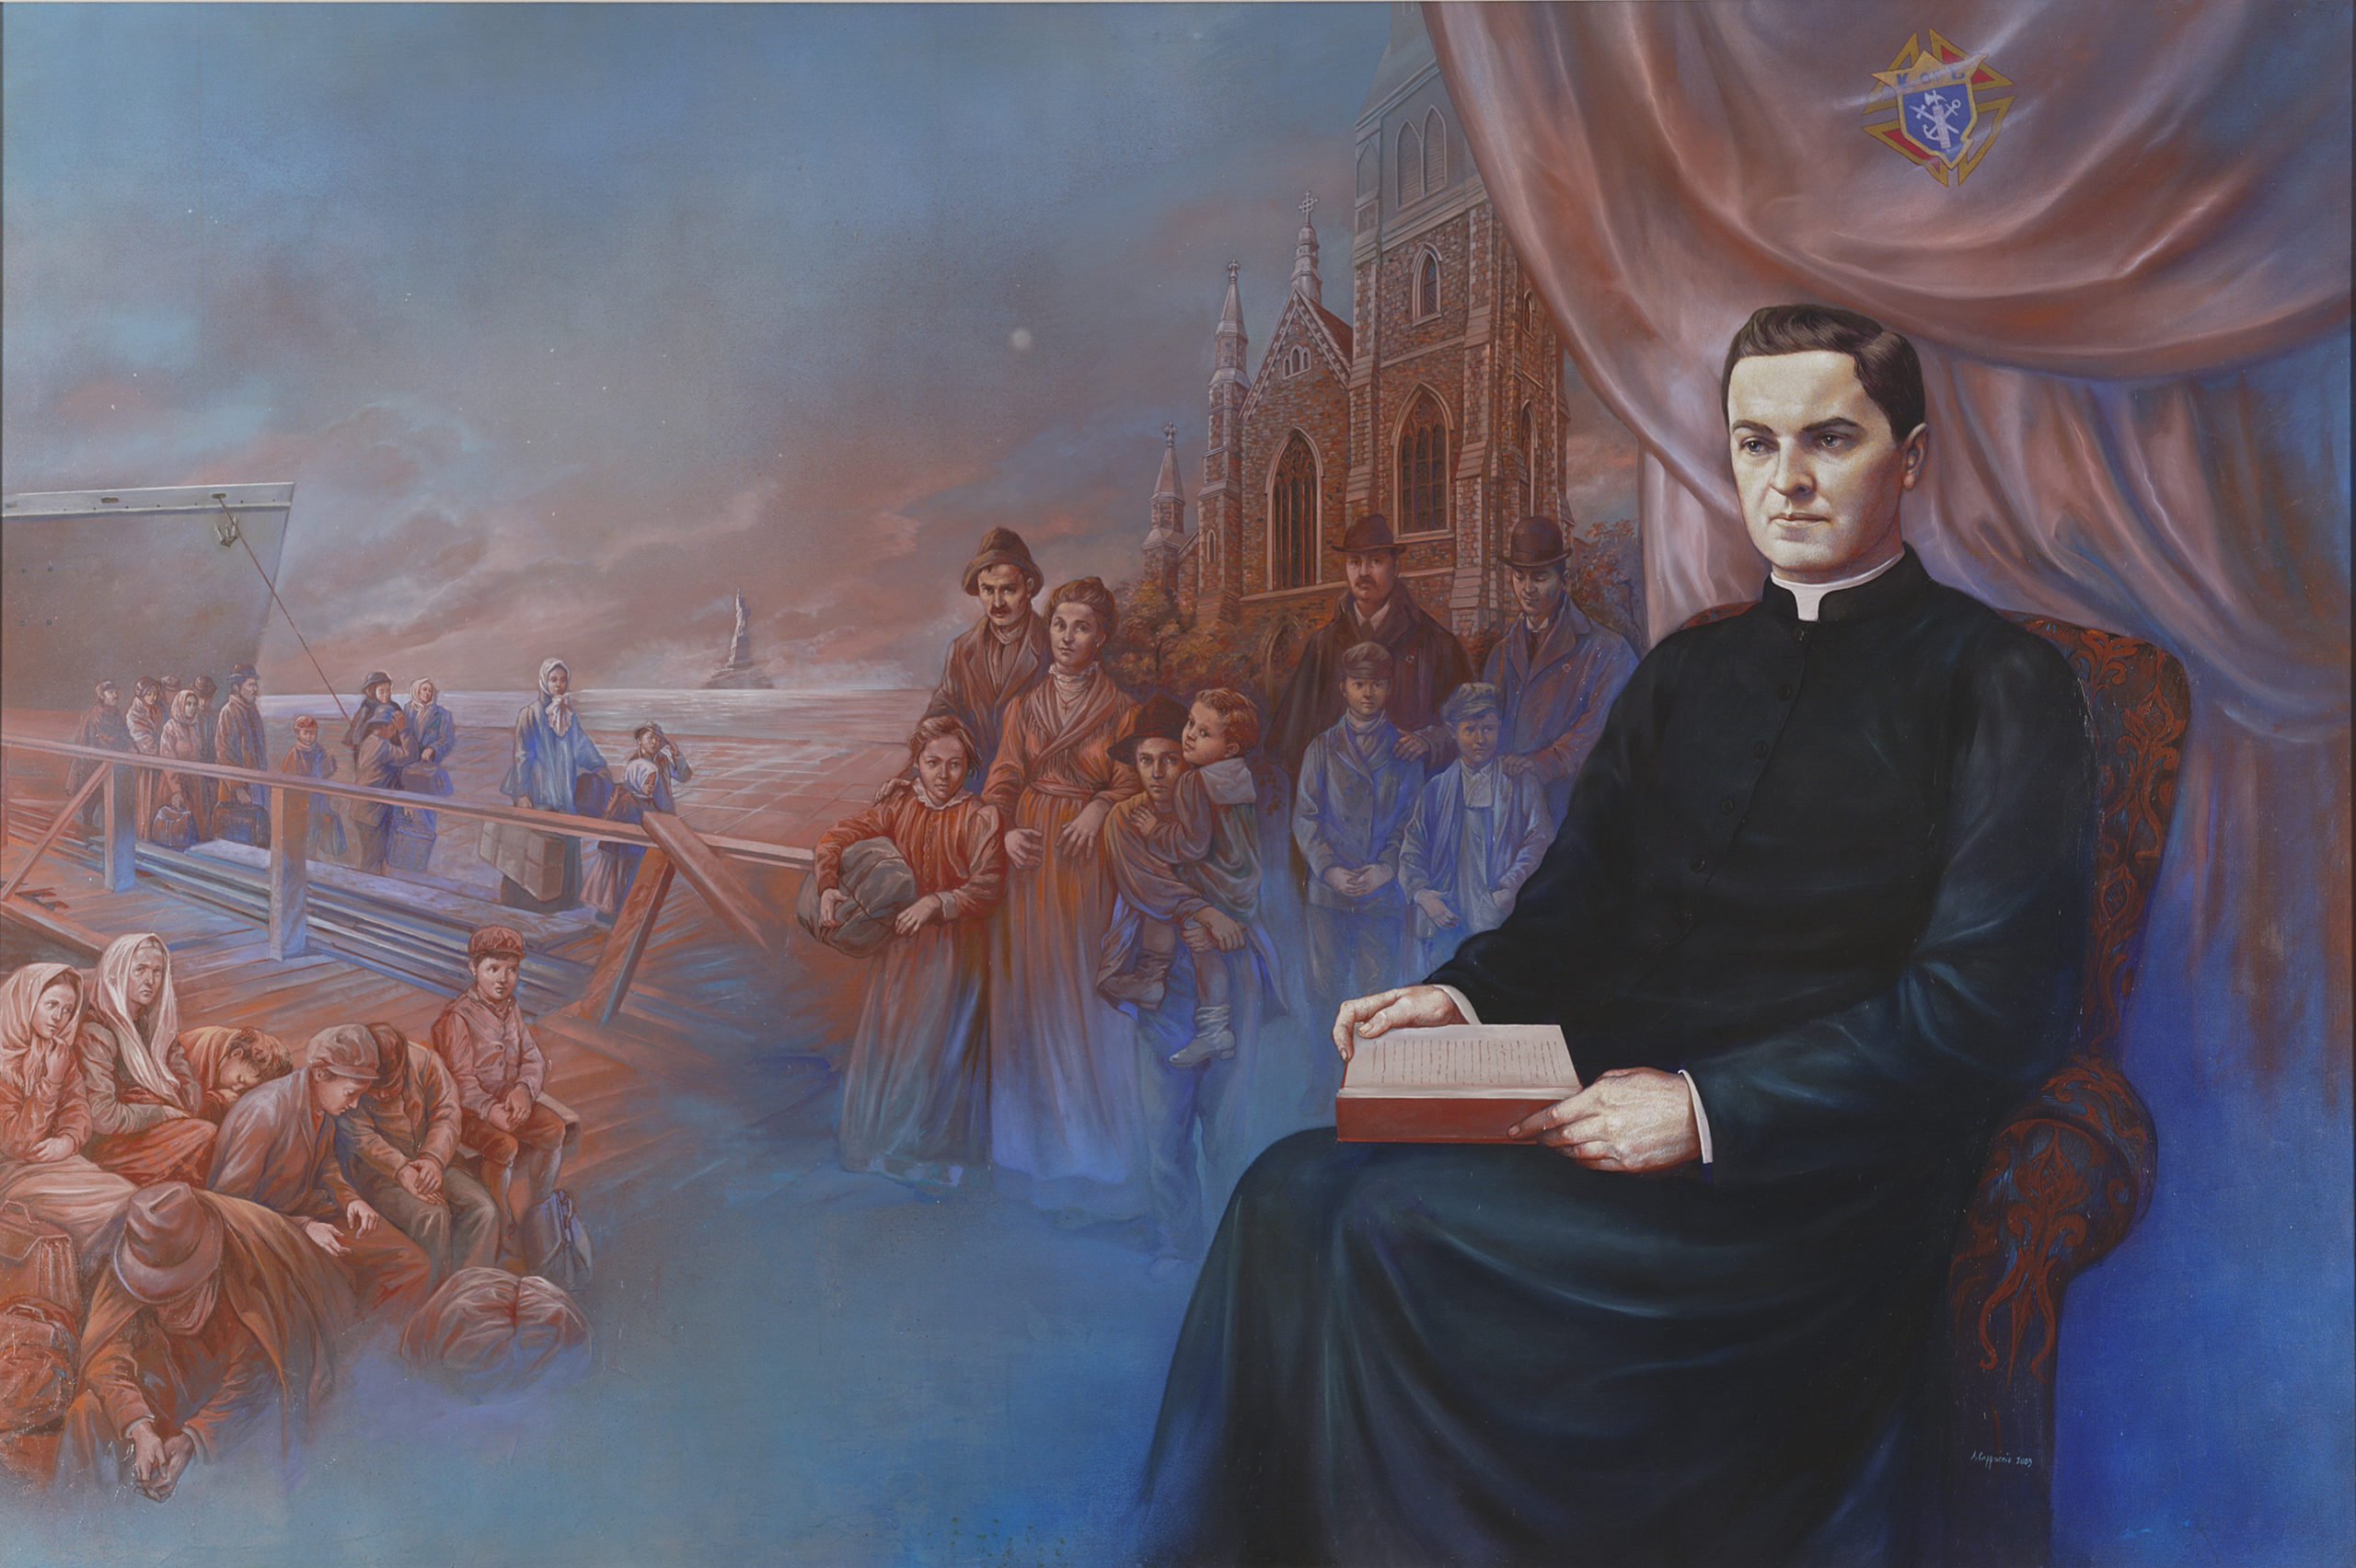 Knights of Columbus Founder Father Michael McGivney Moves Closer to Sainthood